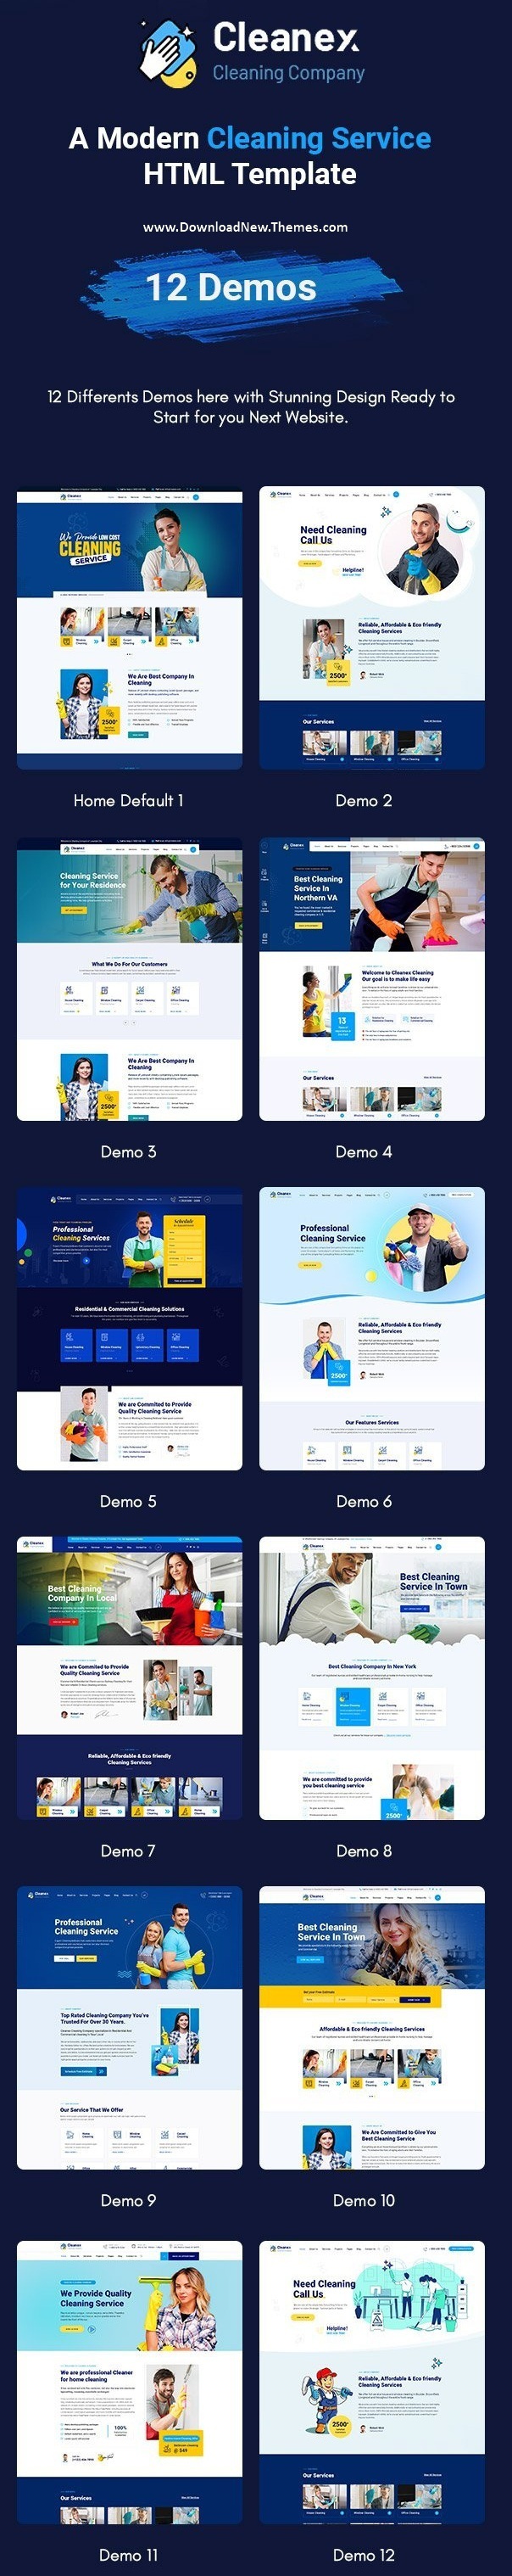 Cleanex - Cleaning Service HTML Template Review